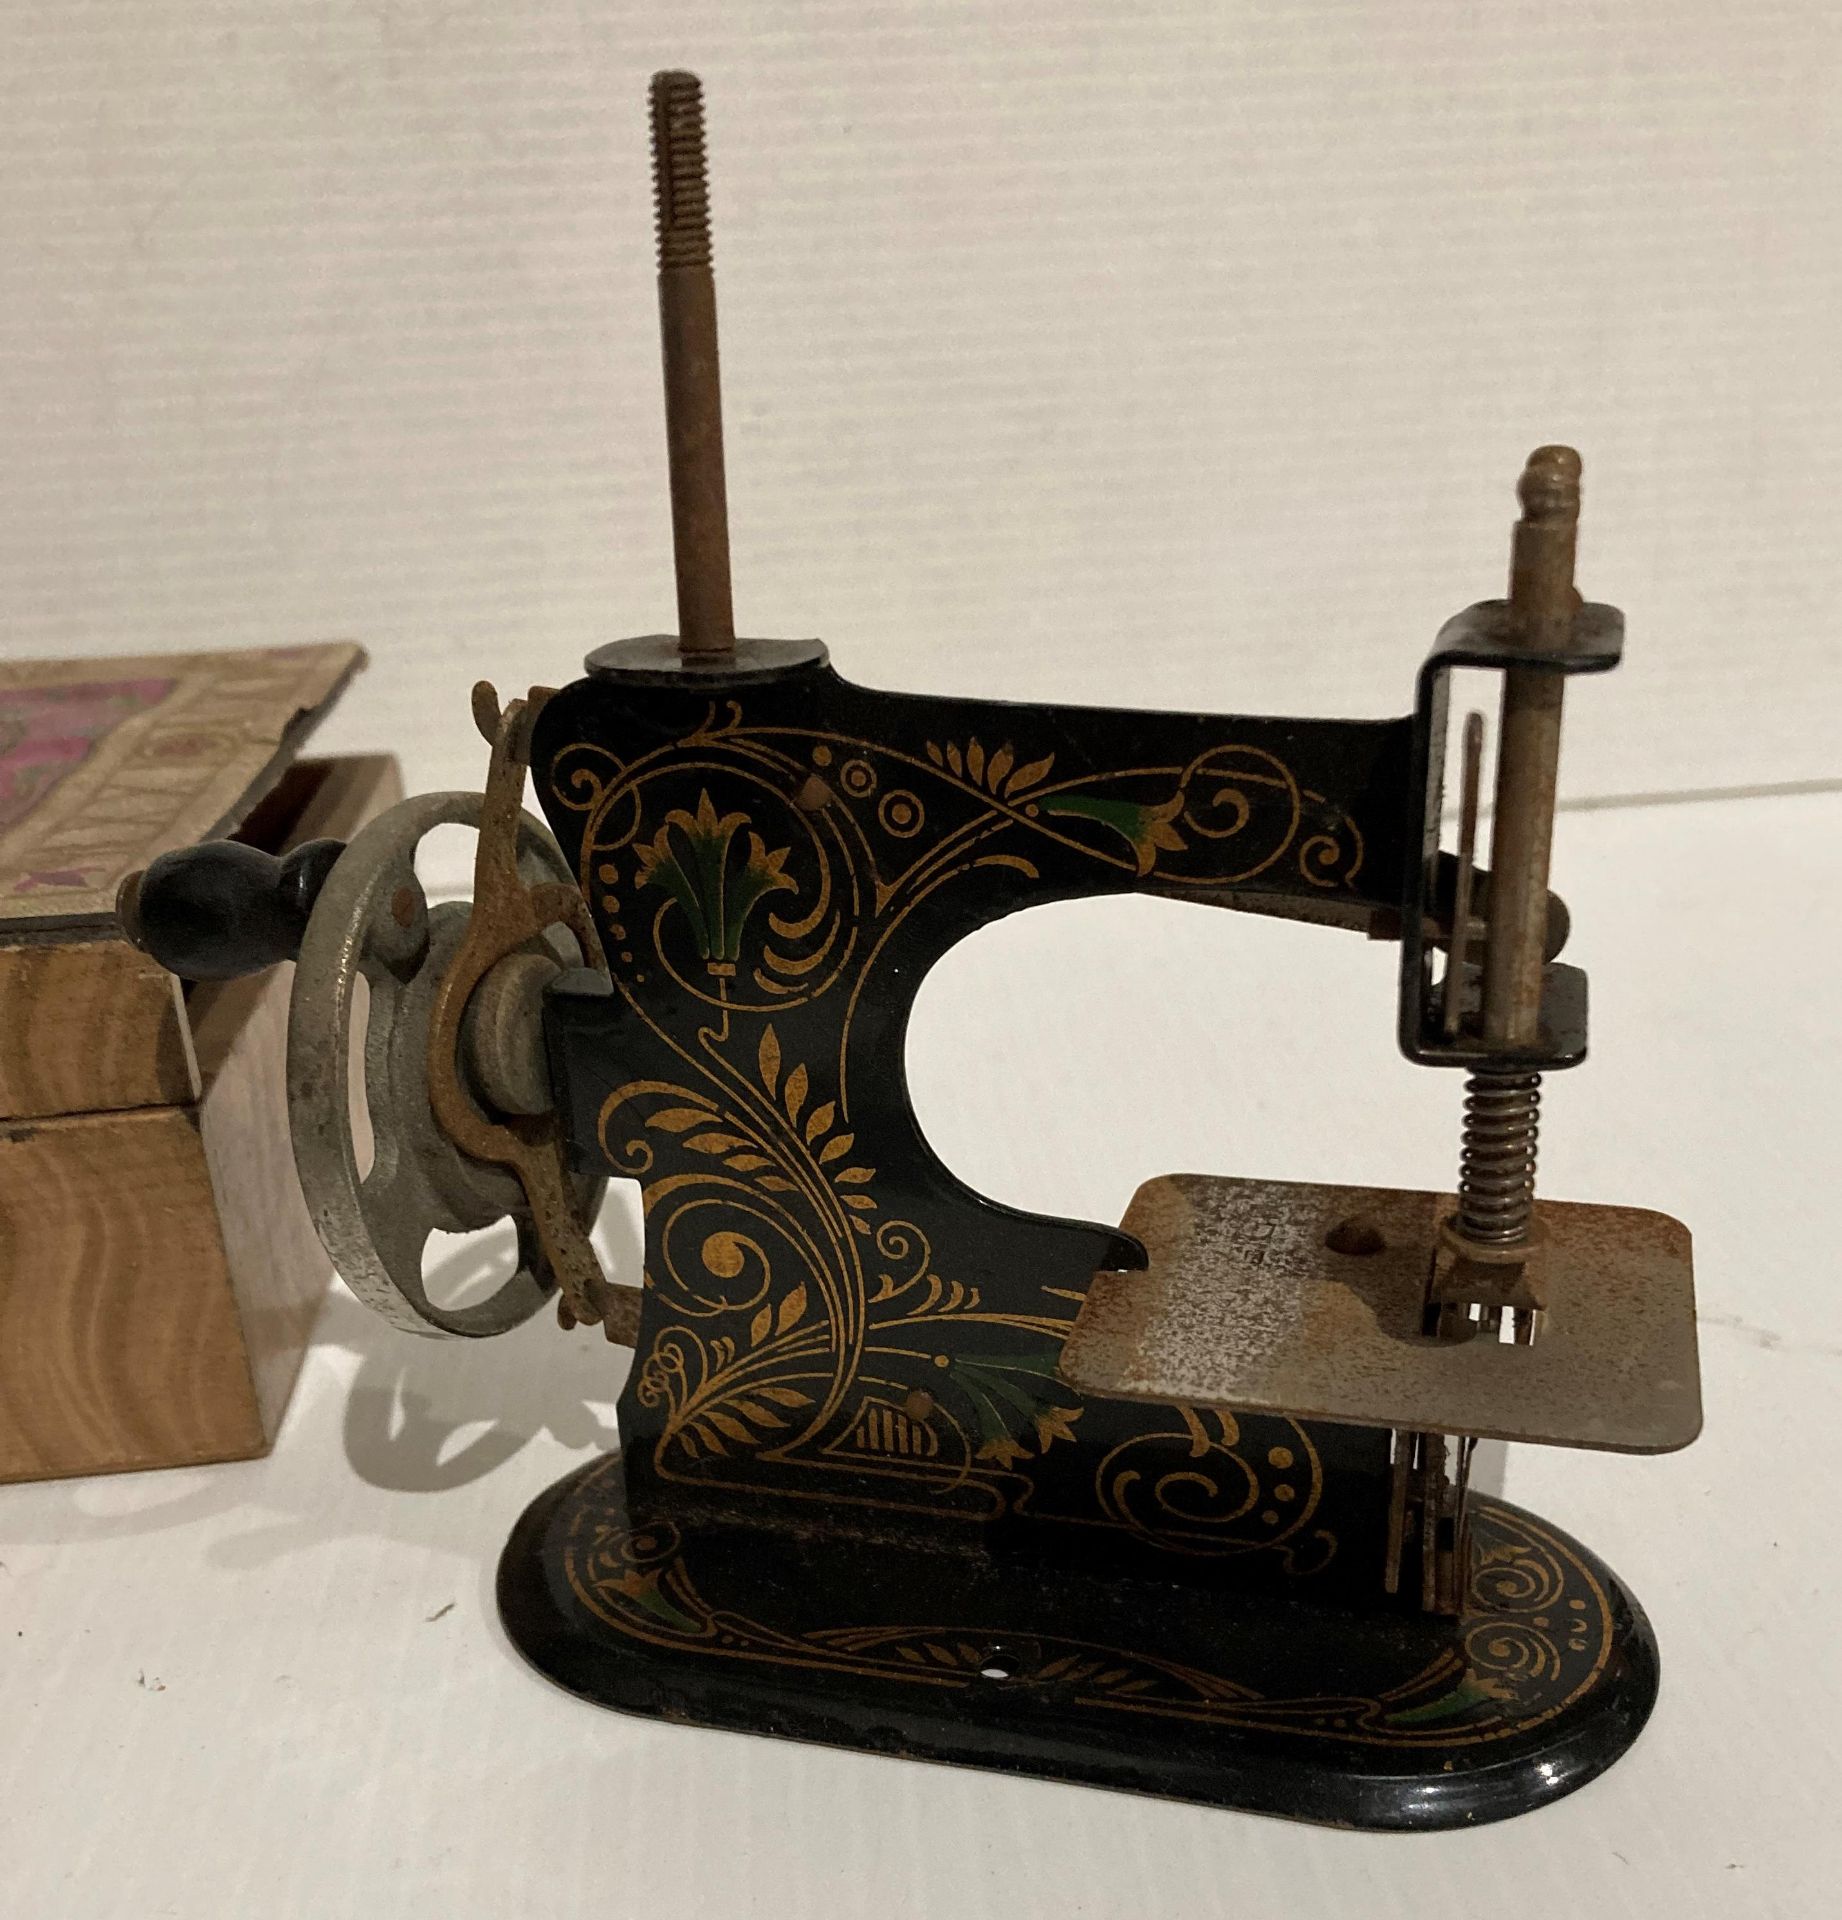 German Muller TSM/Miniature toy sewing machine in black and gold in a wooden box (saleroom - Image 3 of 6